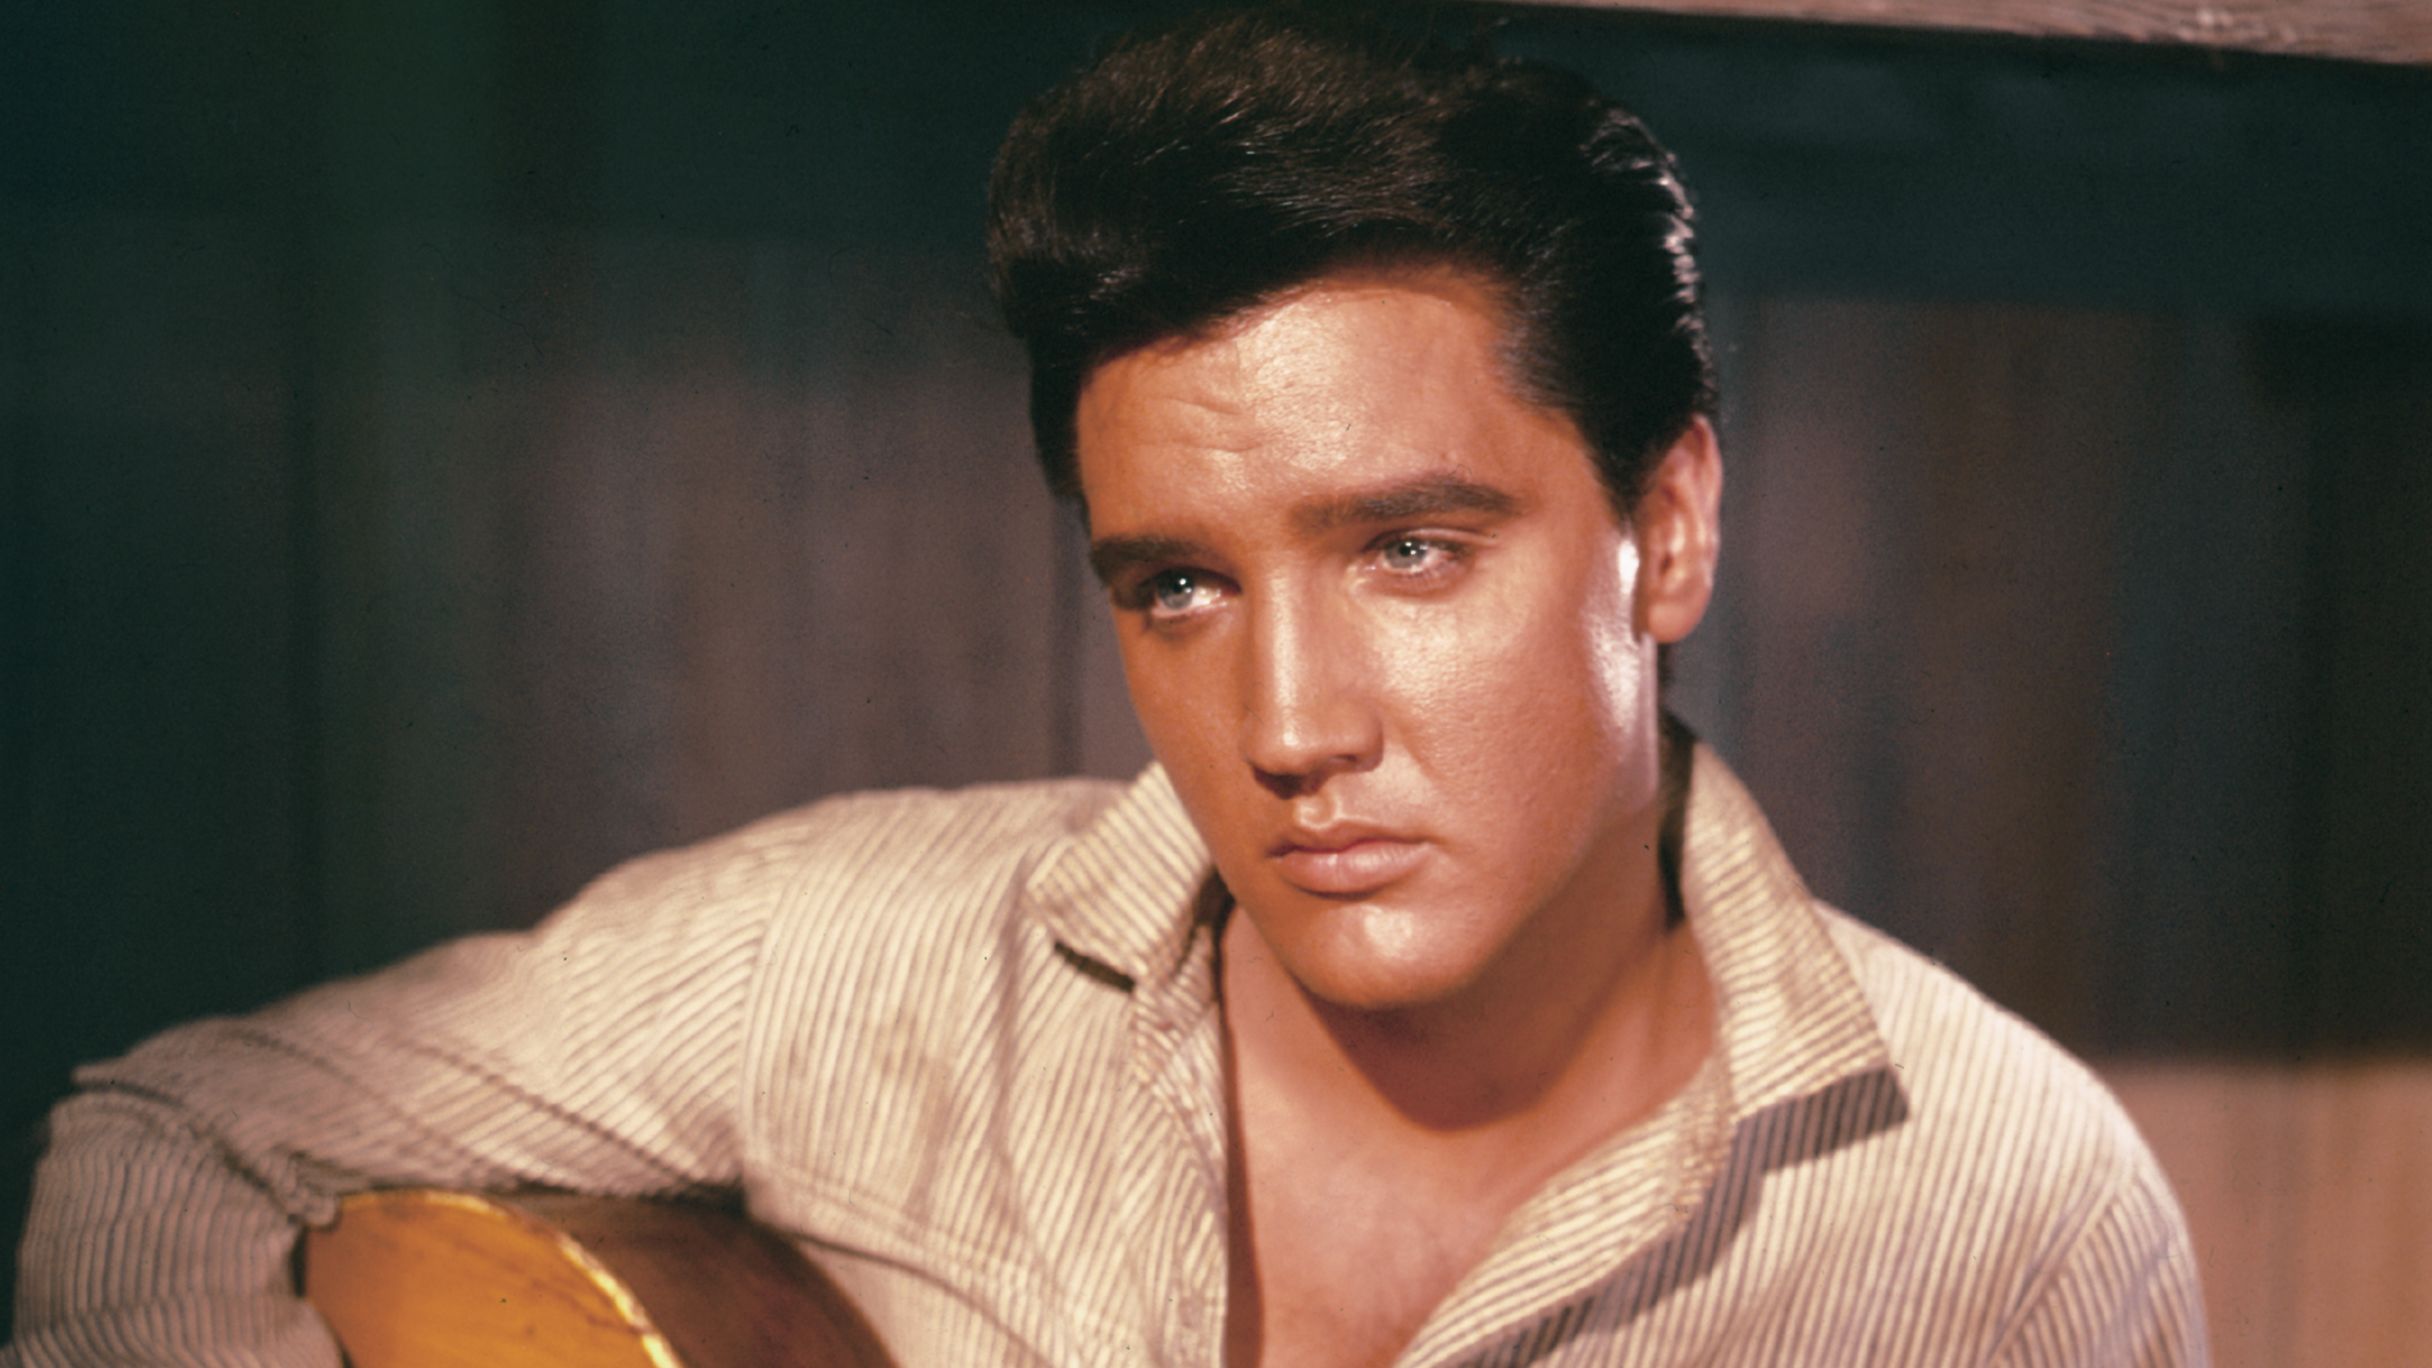 8 things you may not know about Elvis Presley